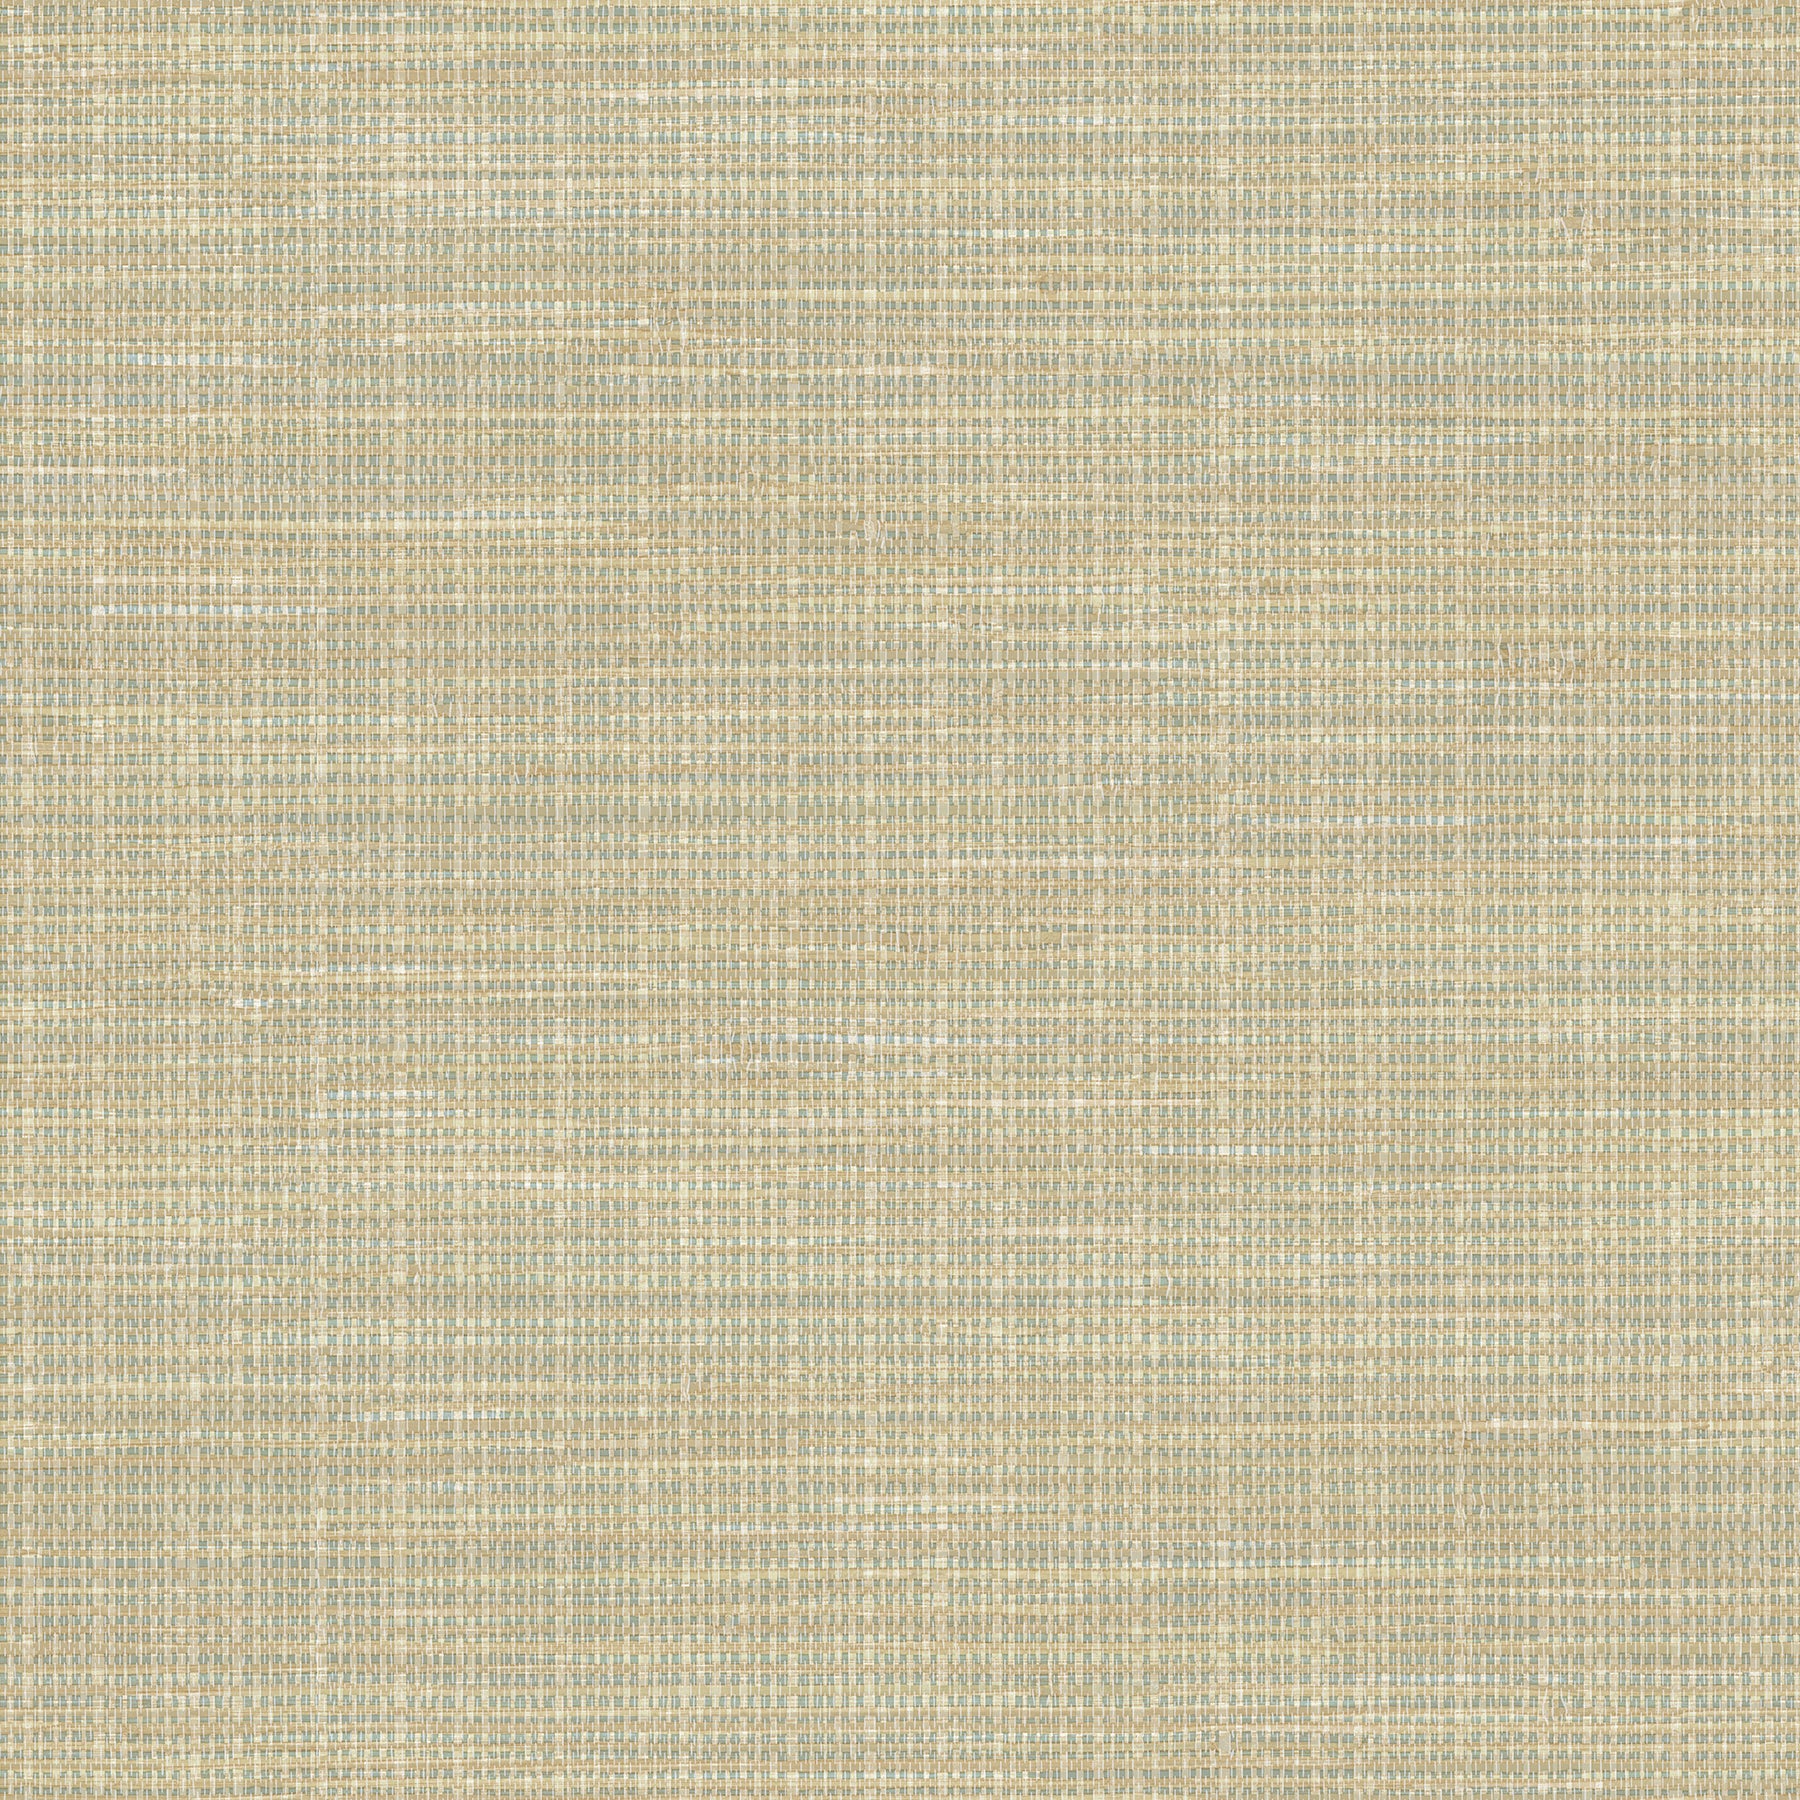 Order 2767-01694 Hartman Neutral Faux Grasscloth Techniques & Finishes III Brewster